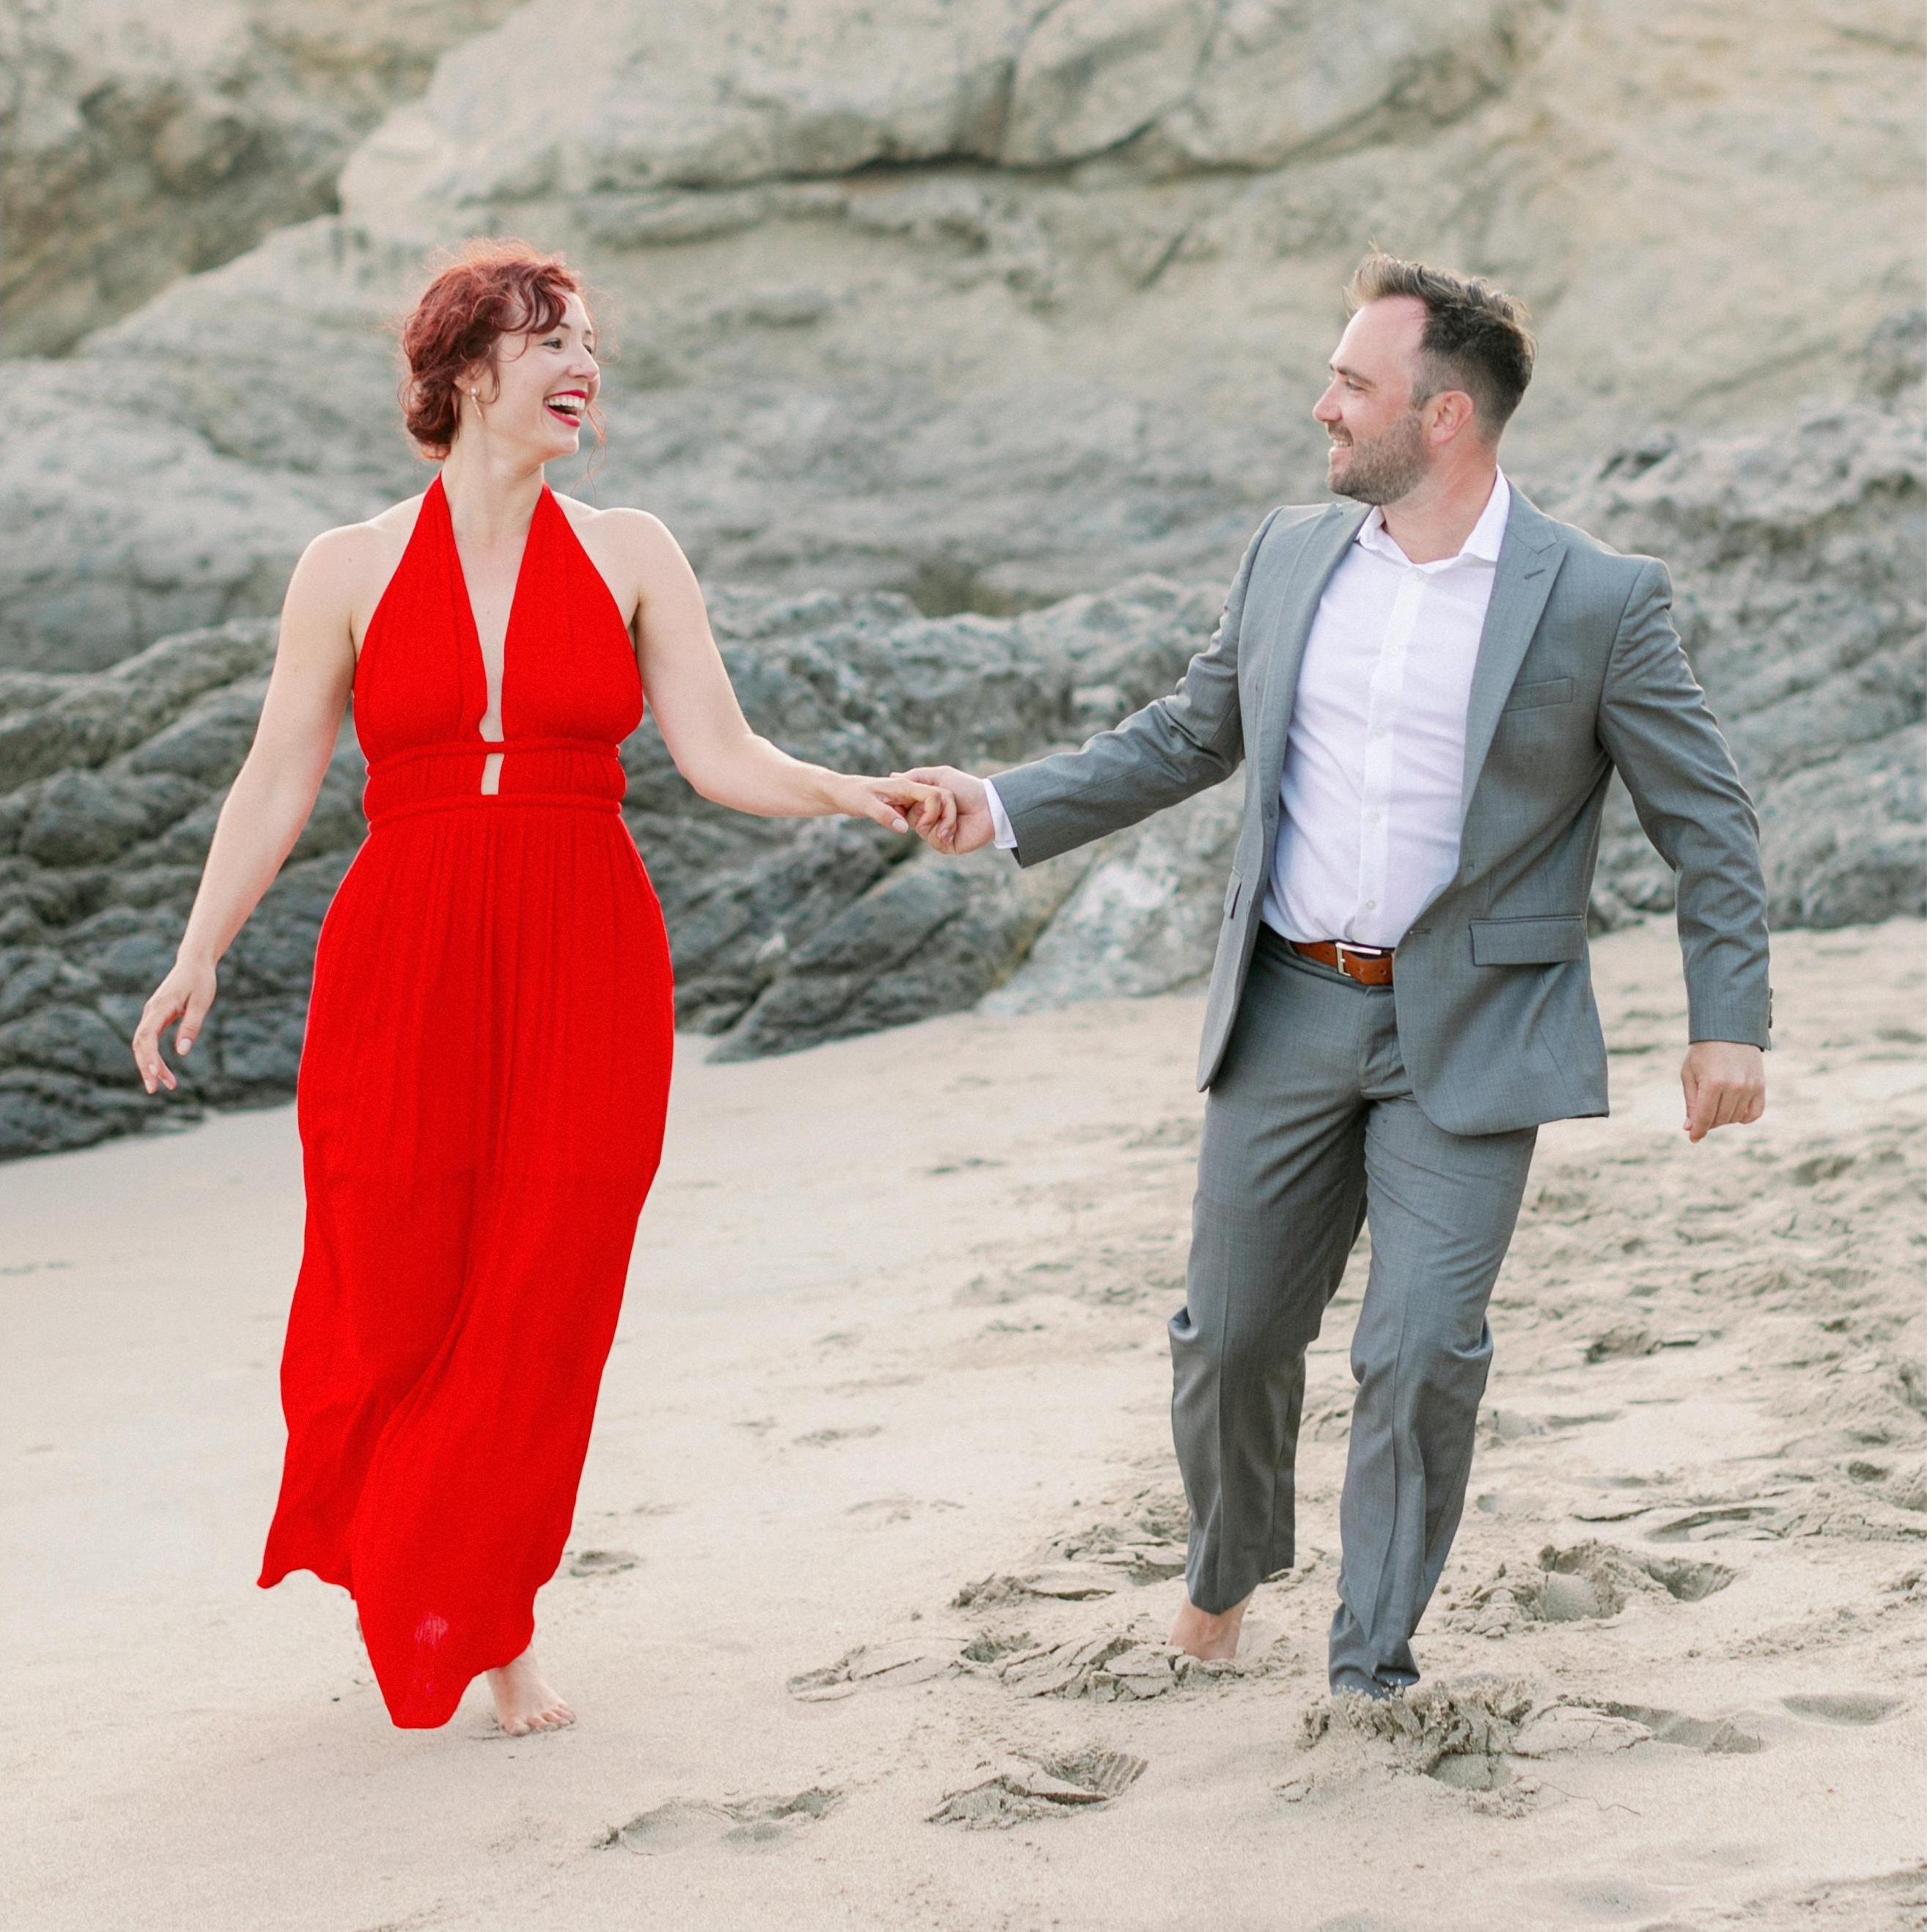 We celebrated our original wedding date that we postponed by having a photo session in Malibu with our photographer. It was beautiful!